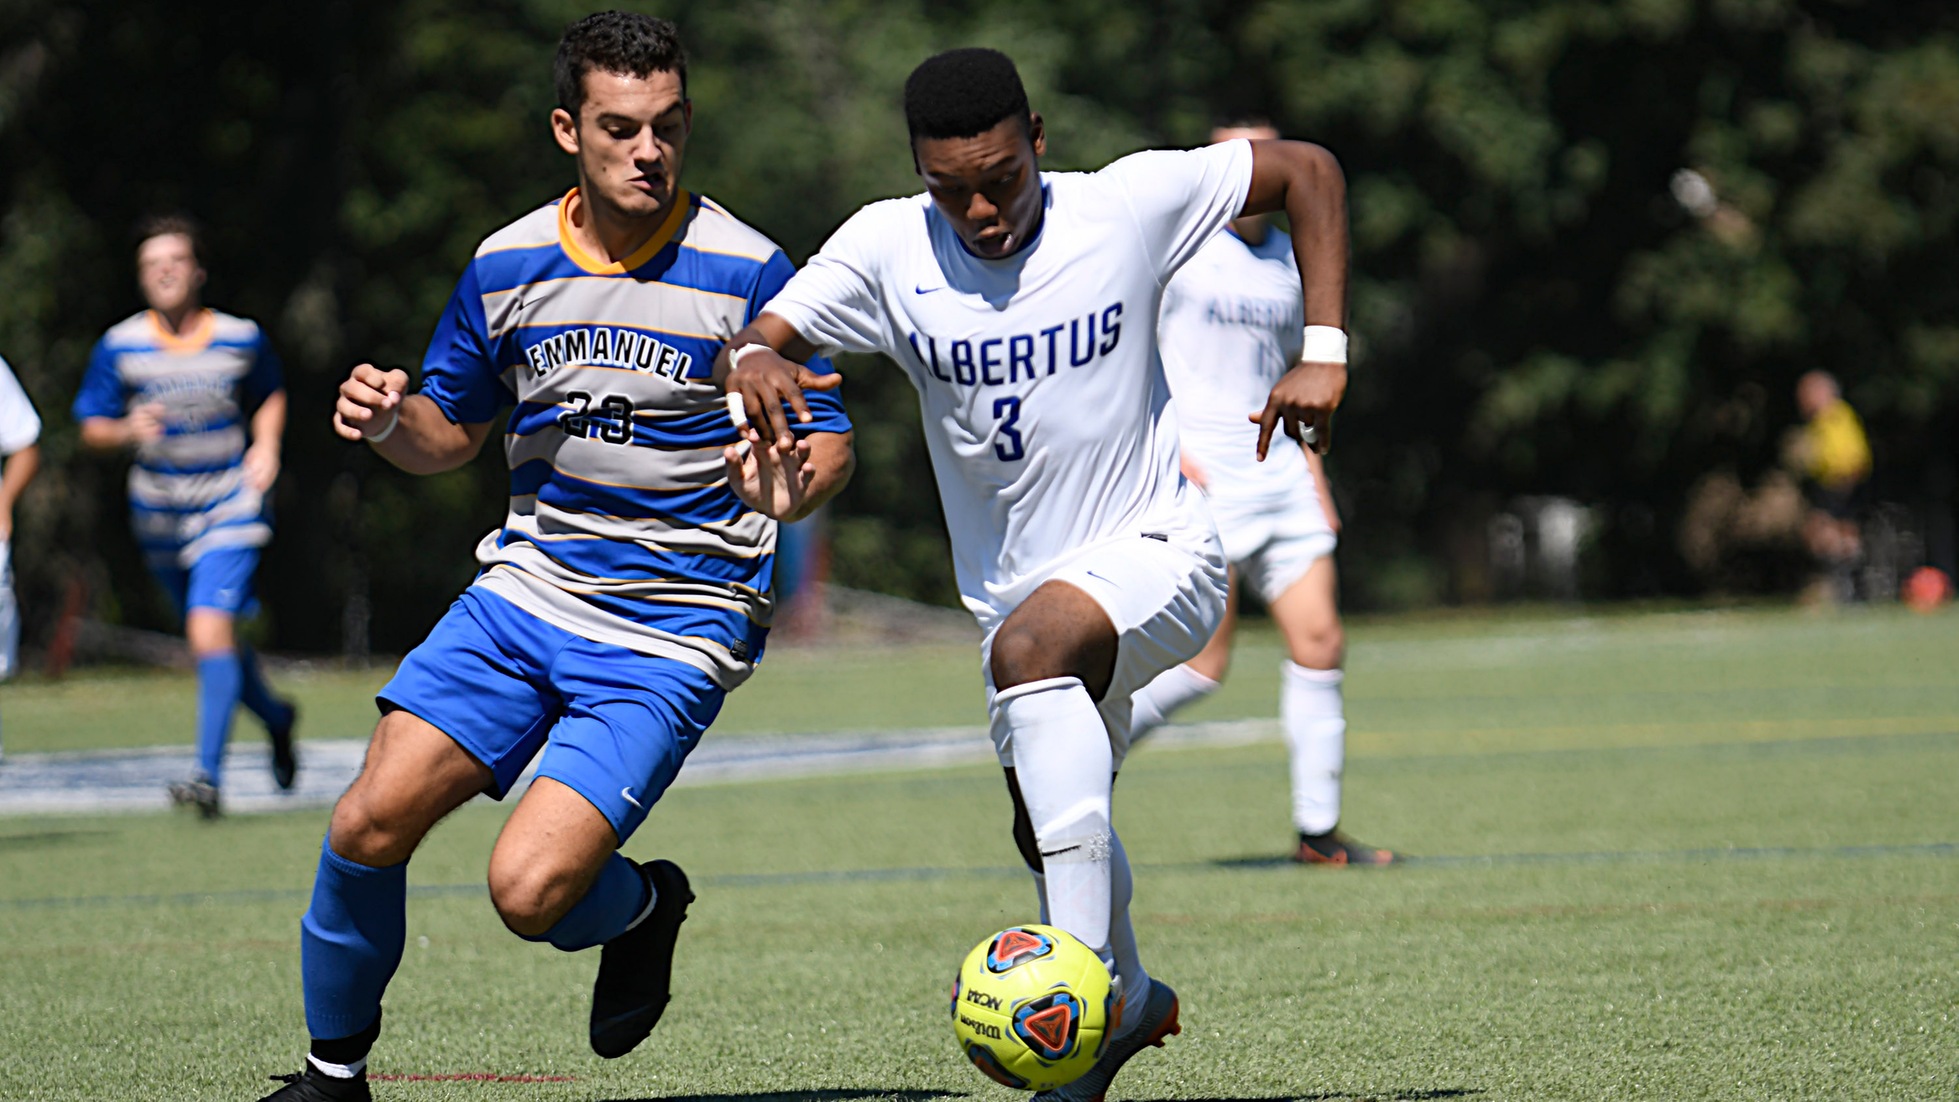 Yeboah Scores Game-Winner in Falcons' 2-1 Win over Lasell